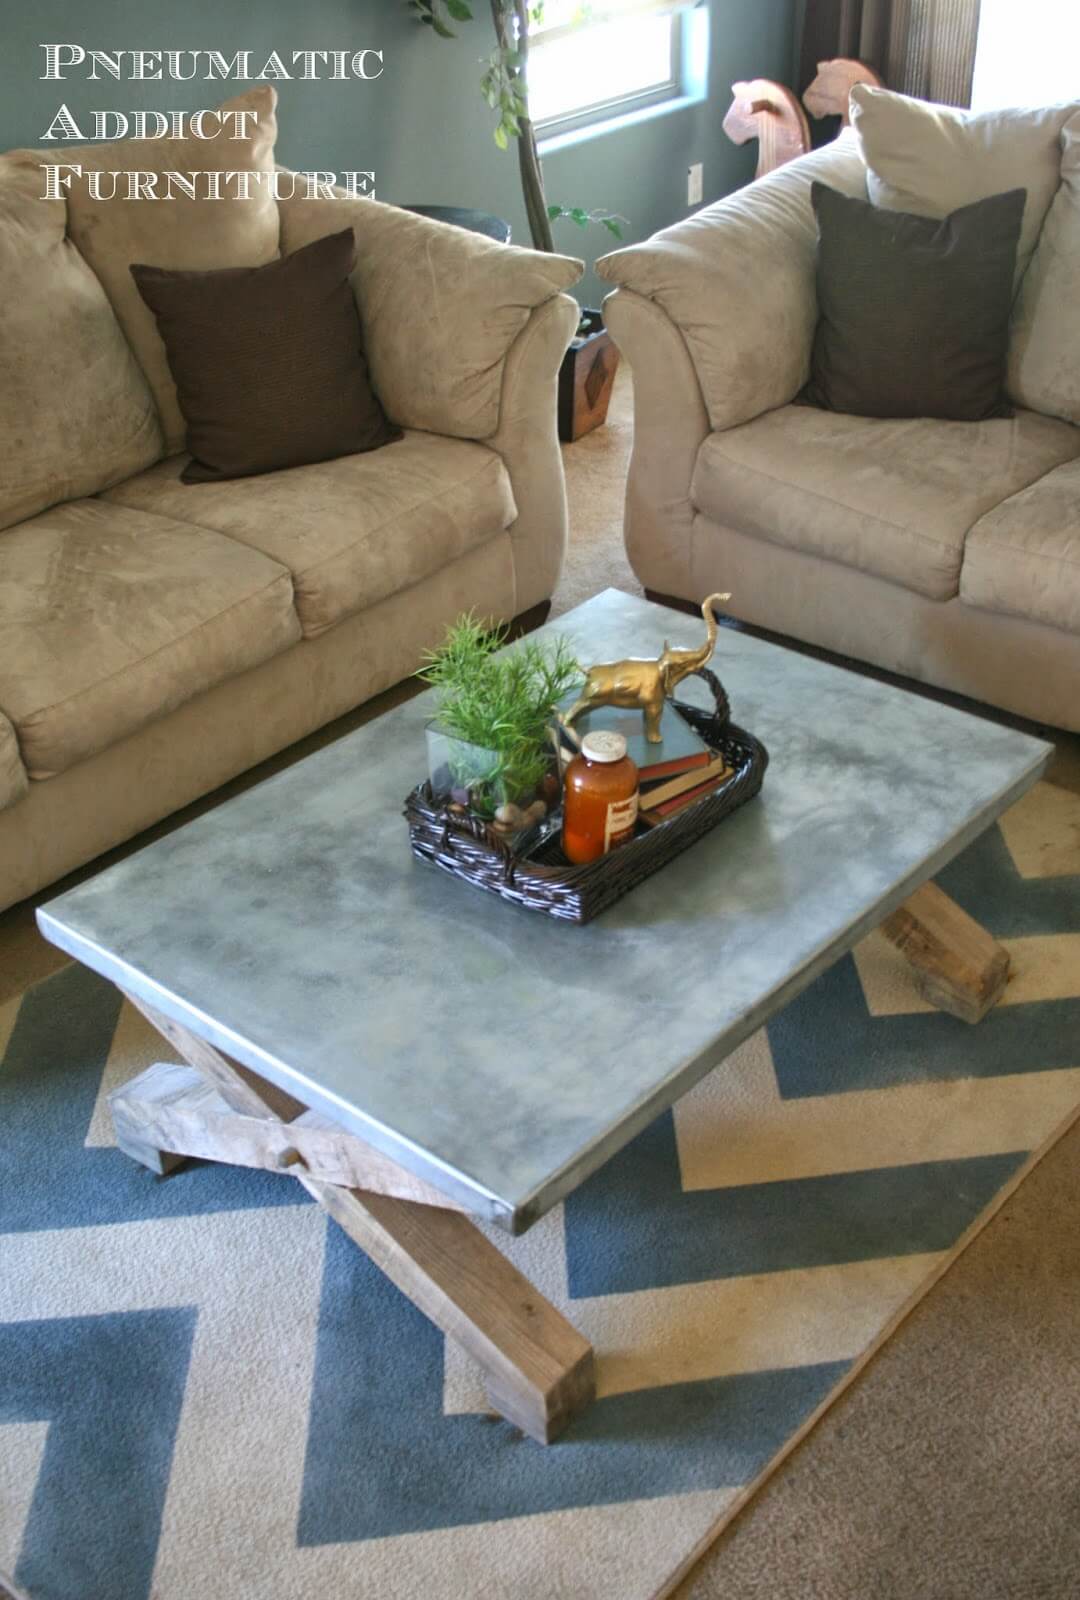 From The Work Bench to The Coffee Table